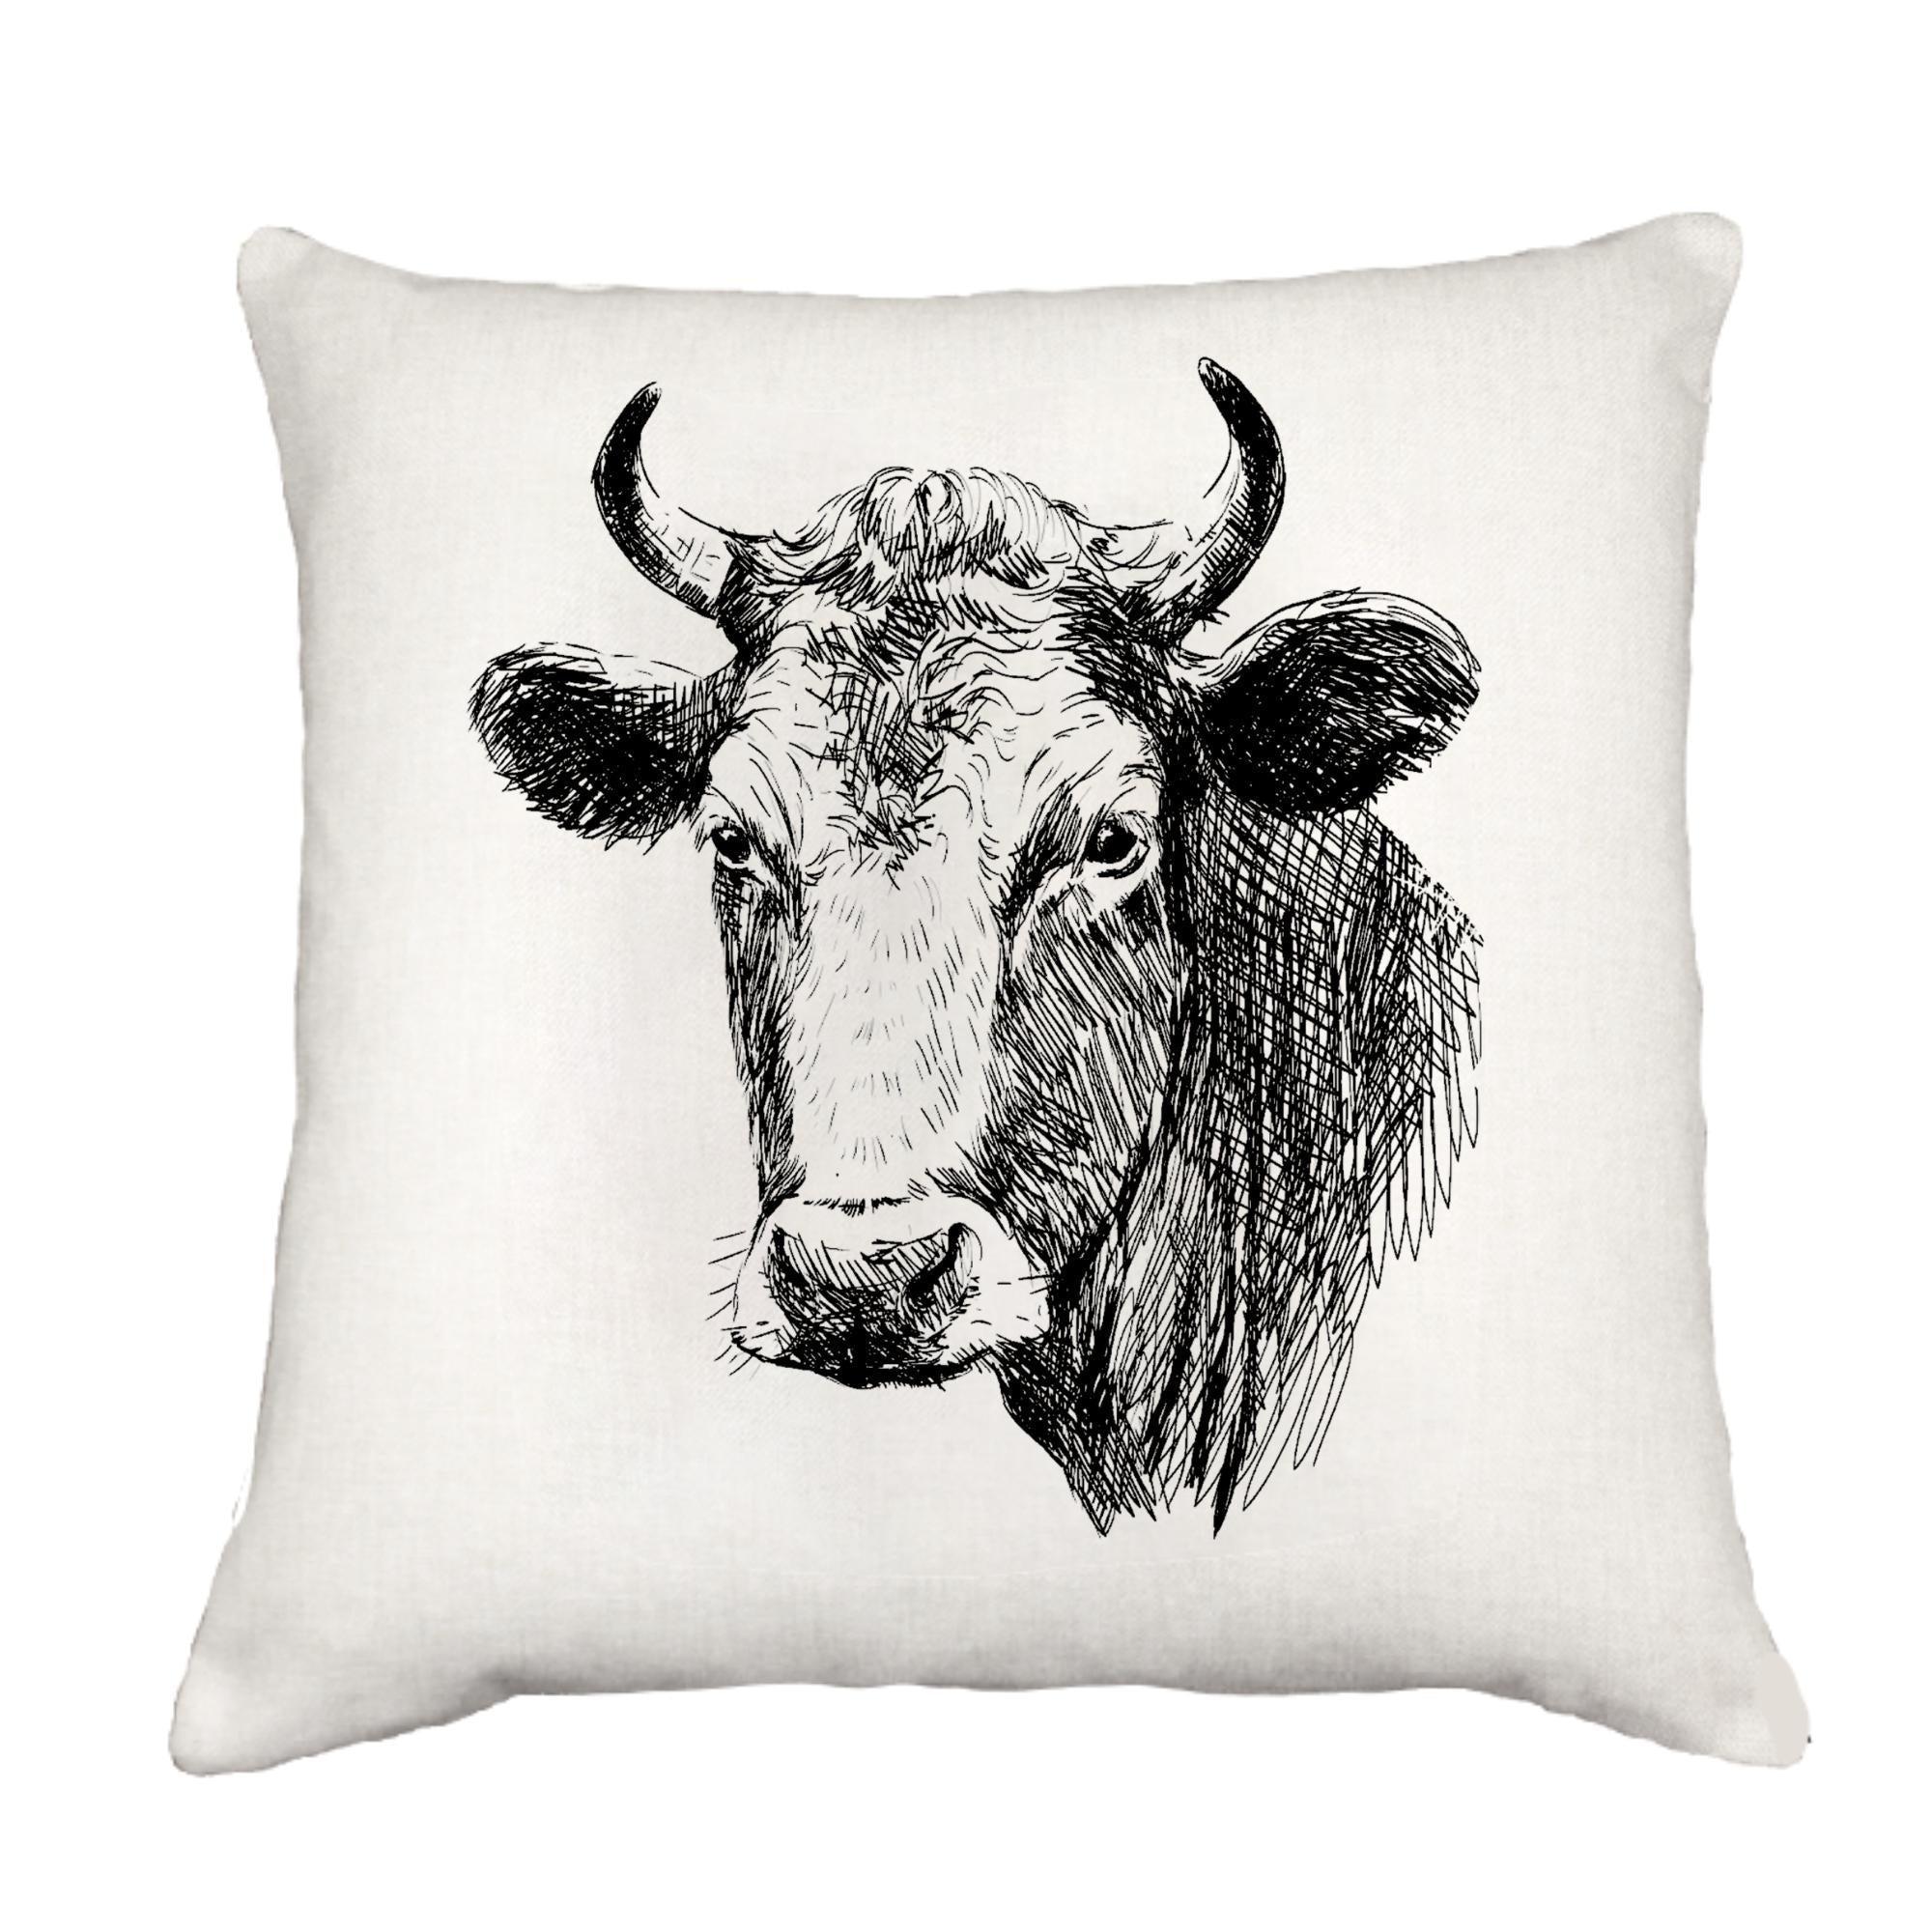 Cow Cottage Pillow Throw/Decorative Pillow - Southern Sisters